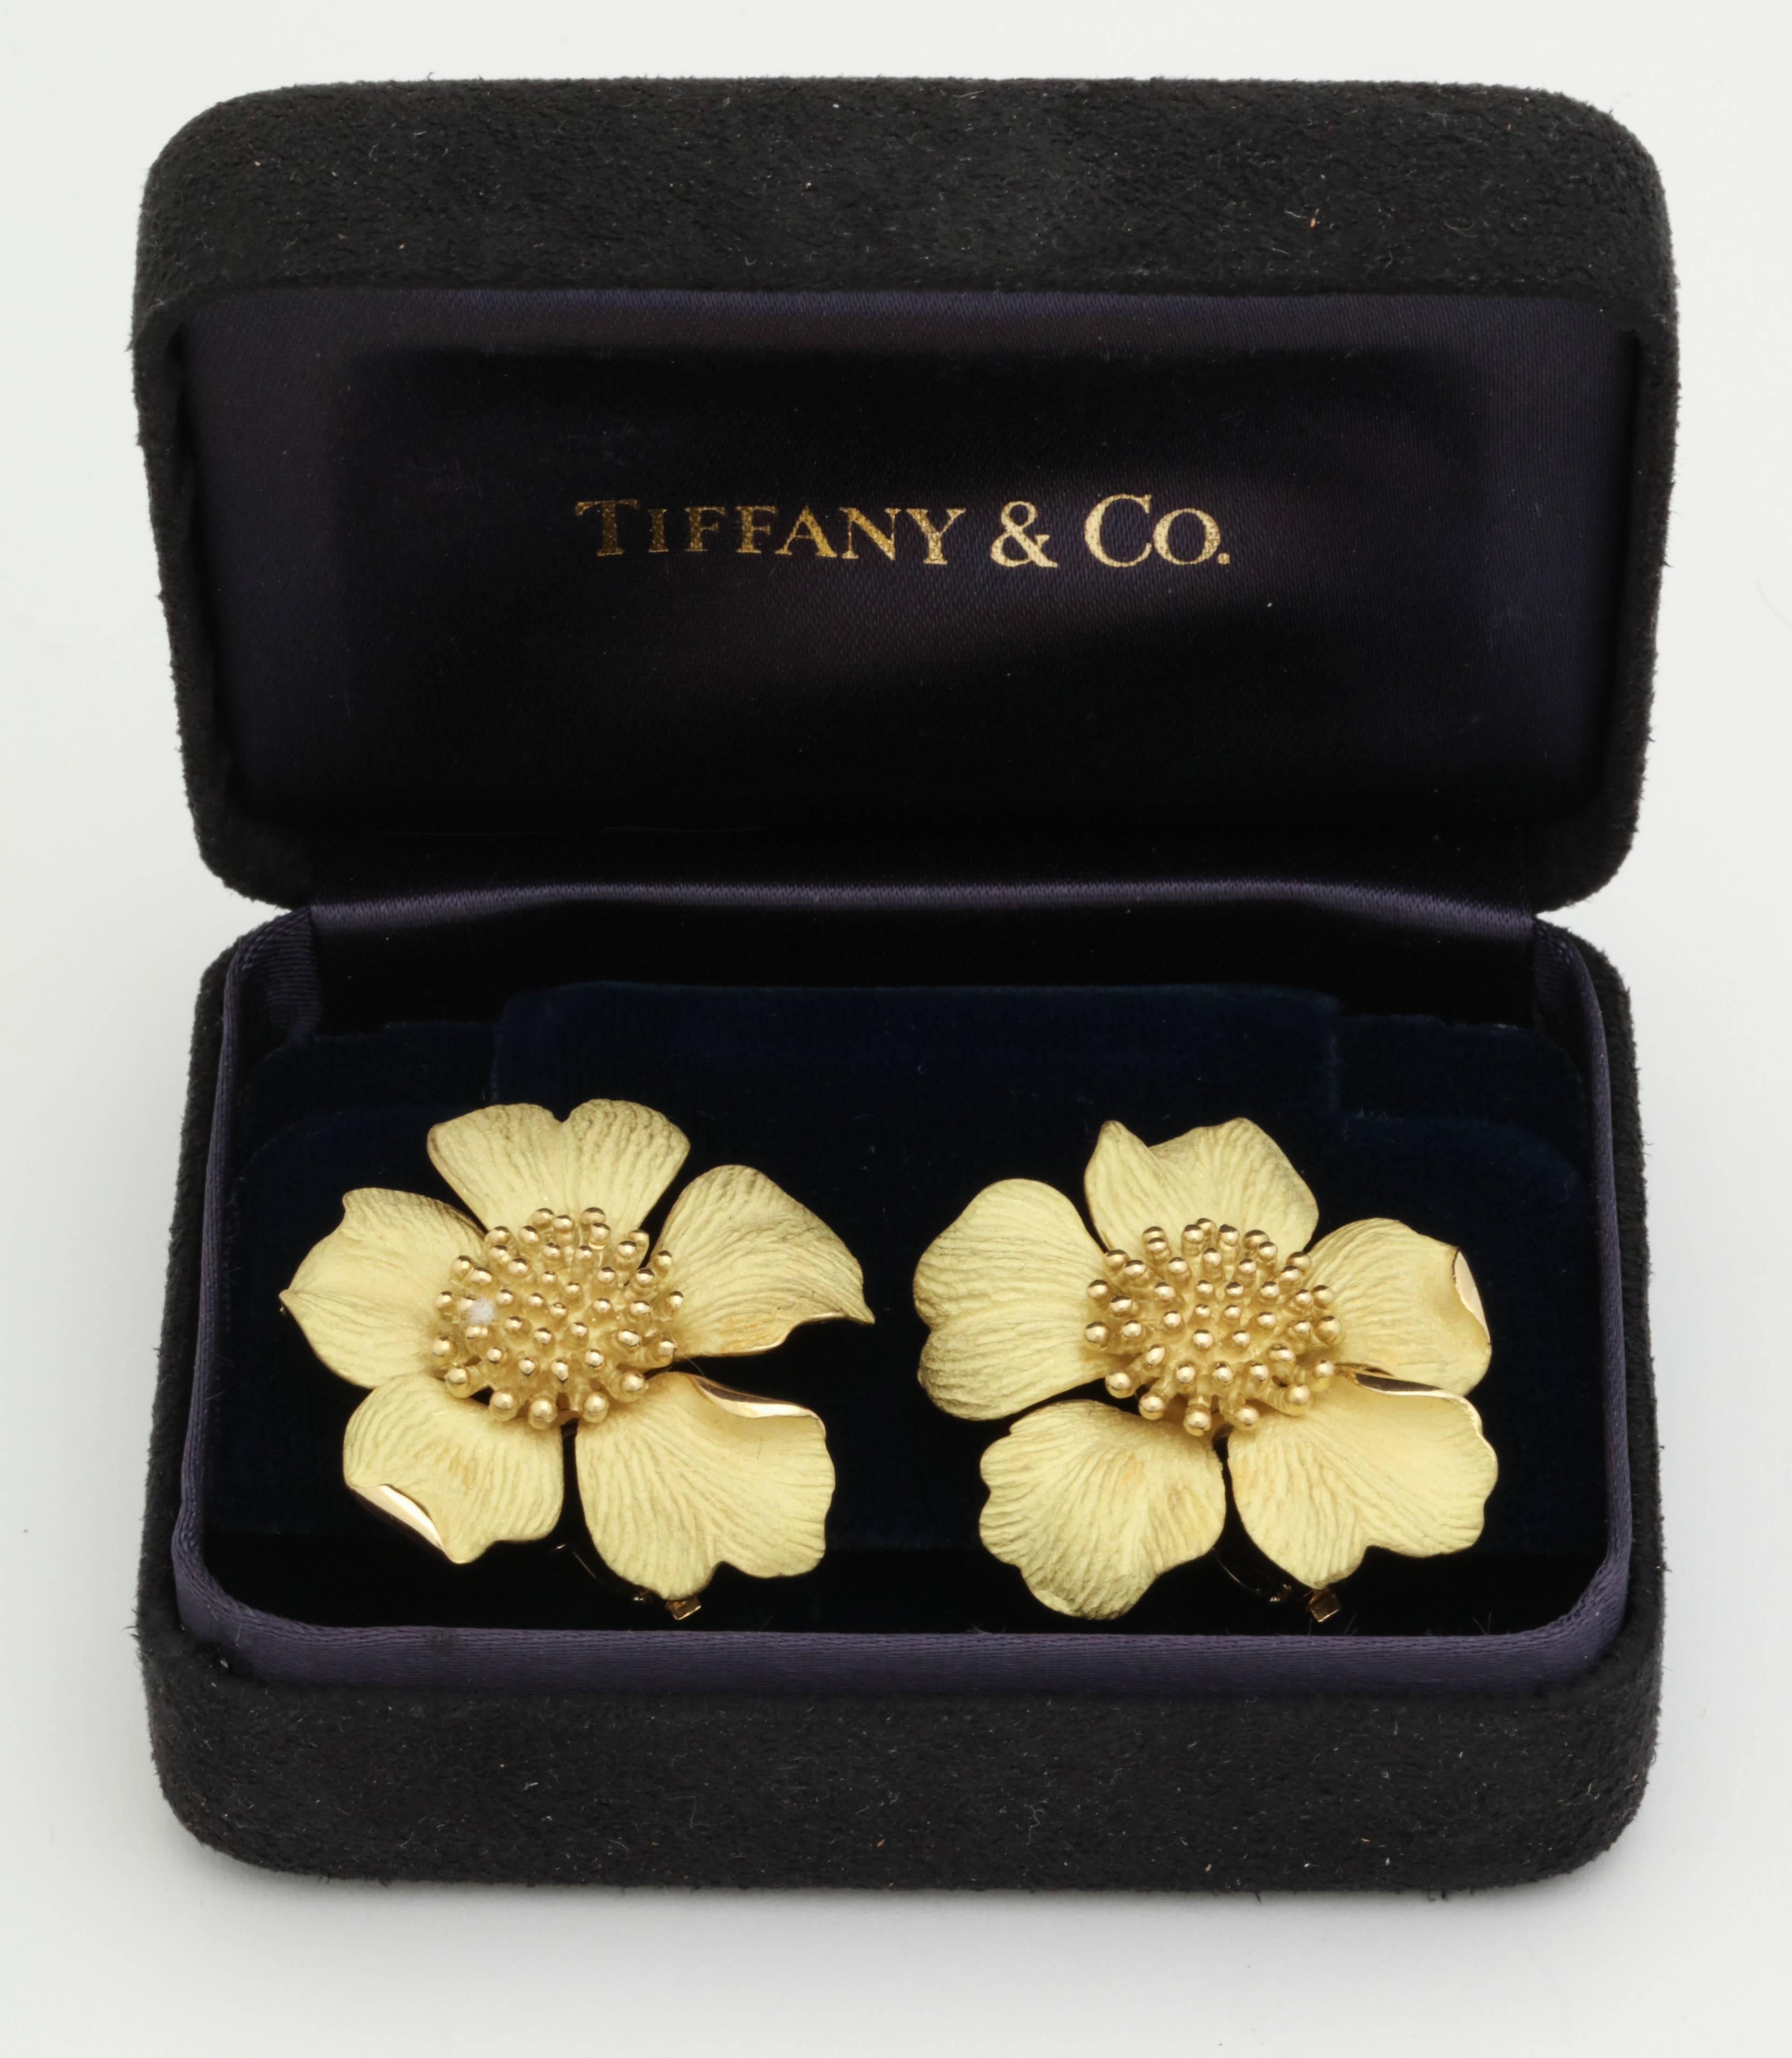 One Pair Of Ladies 18kt Silky Mate Finish Gold Earrings In The Form Of A Cherry Blossom Figural Flower. Very Realistic Formed Flowers With Pistil Centers In 18kt High Polish Gold. Further Designed With 18kt Yellow Gold High Quality Fancy Clip On